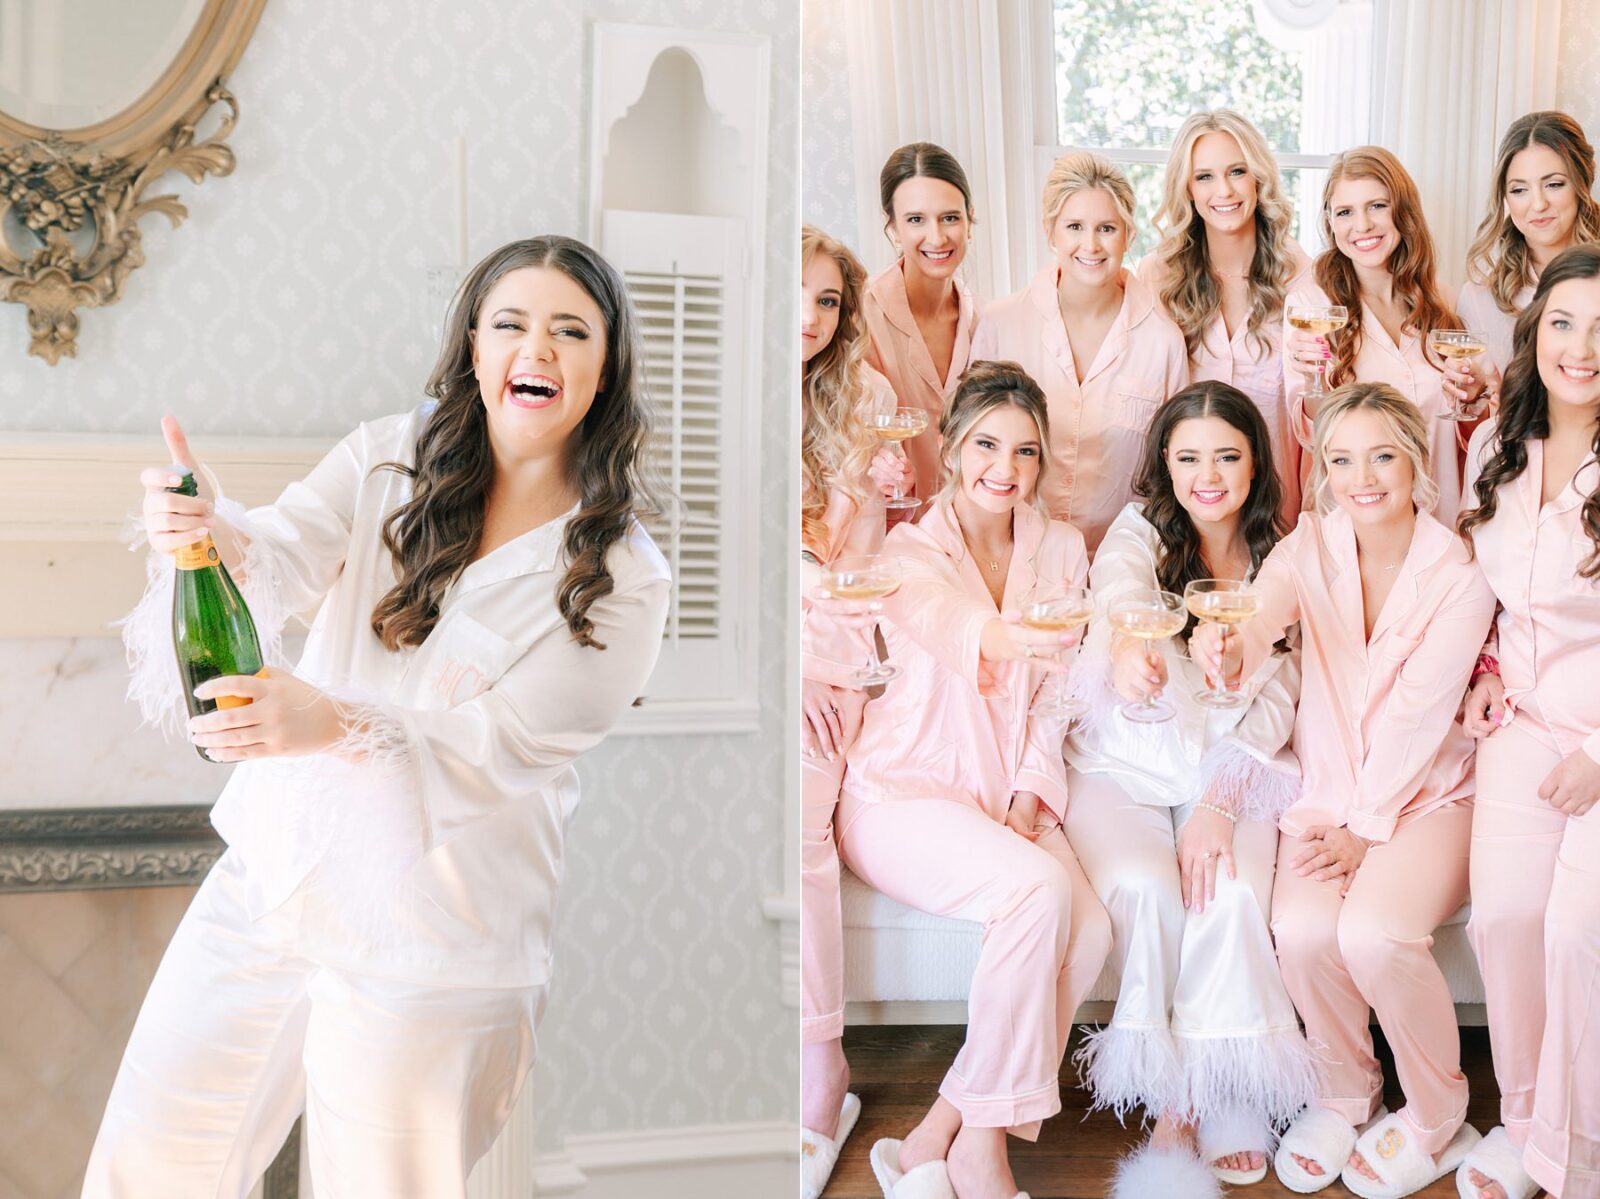 bride popping champagne, bride and bridesmaid champagne toast, pink bridesmaid pajamas, large wedding party getting ready, pink spring wedding at Woodbine mansion wedding venue, photography by Tara Lyons Photography, The event shop wedding planner